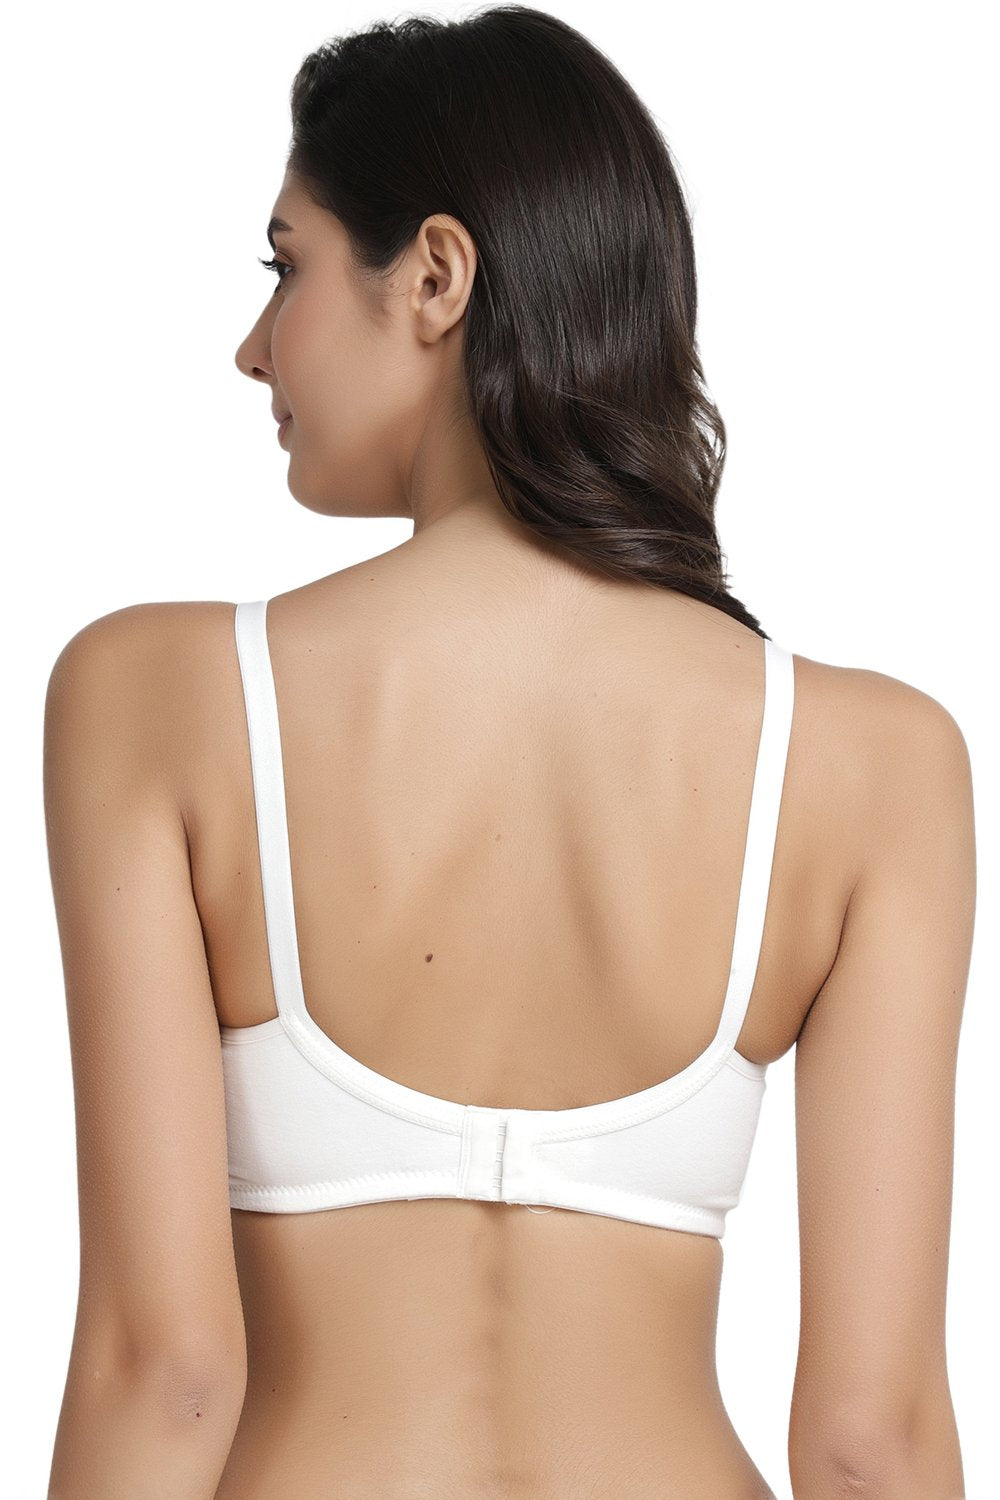 Inner Sense Organic Cotton Antimicrobial Soft Nursing Bra with Removable Pads featured, Maternity, organic - bare essentials